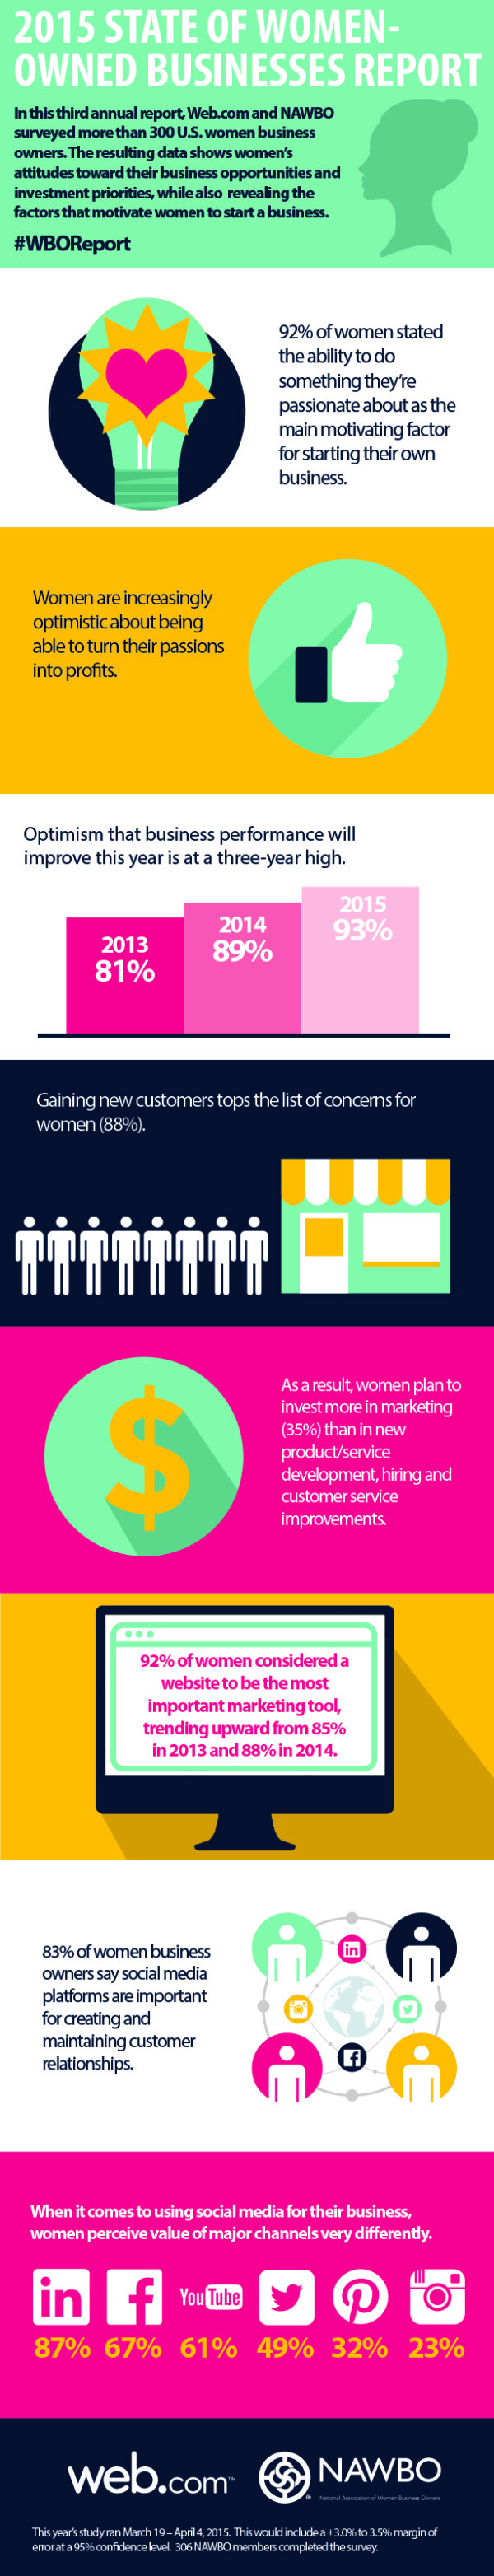 2015-State-of-Women-Owned-Businesses-Report-infographic